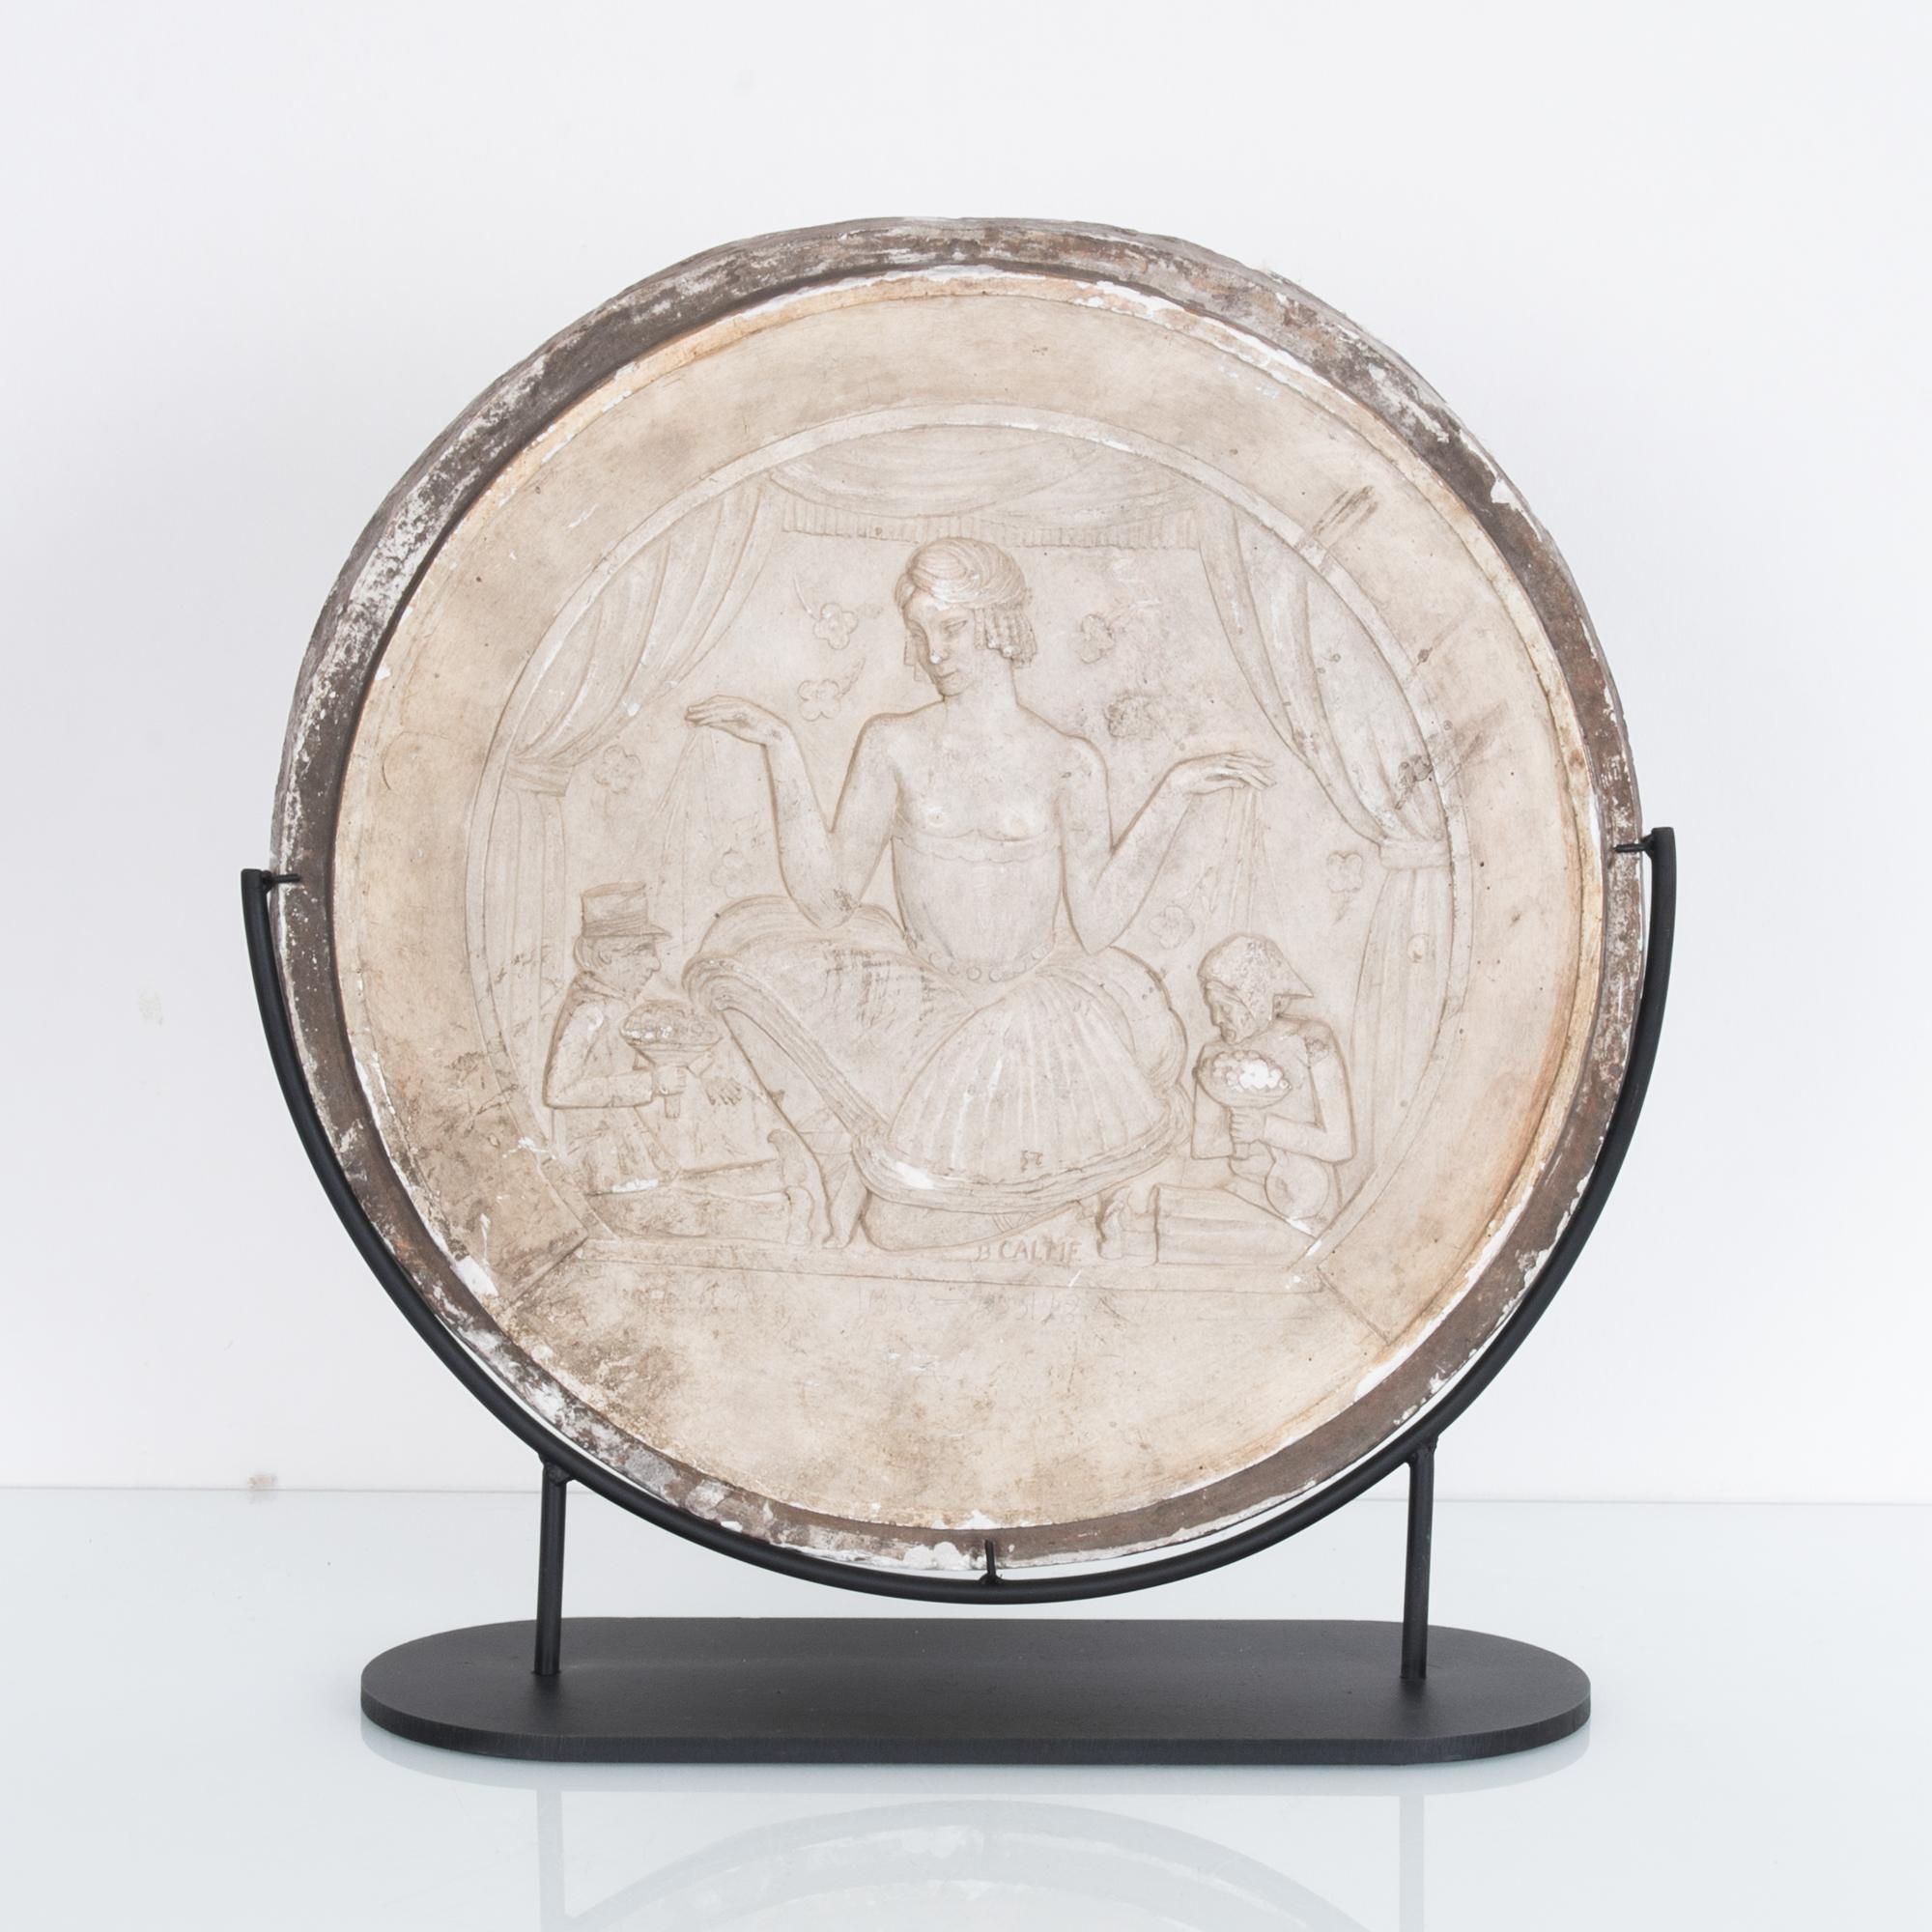 This round plaster decoration was made in Belgium in the 1930s. A white plaster relief, in allegorical art nouveau style, depicts an androgynous, seductive puppeteer being lauded with flowers. A simple metal frame accentuates the fine detail of the